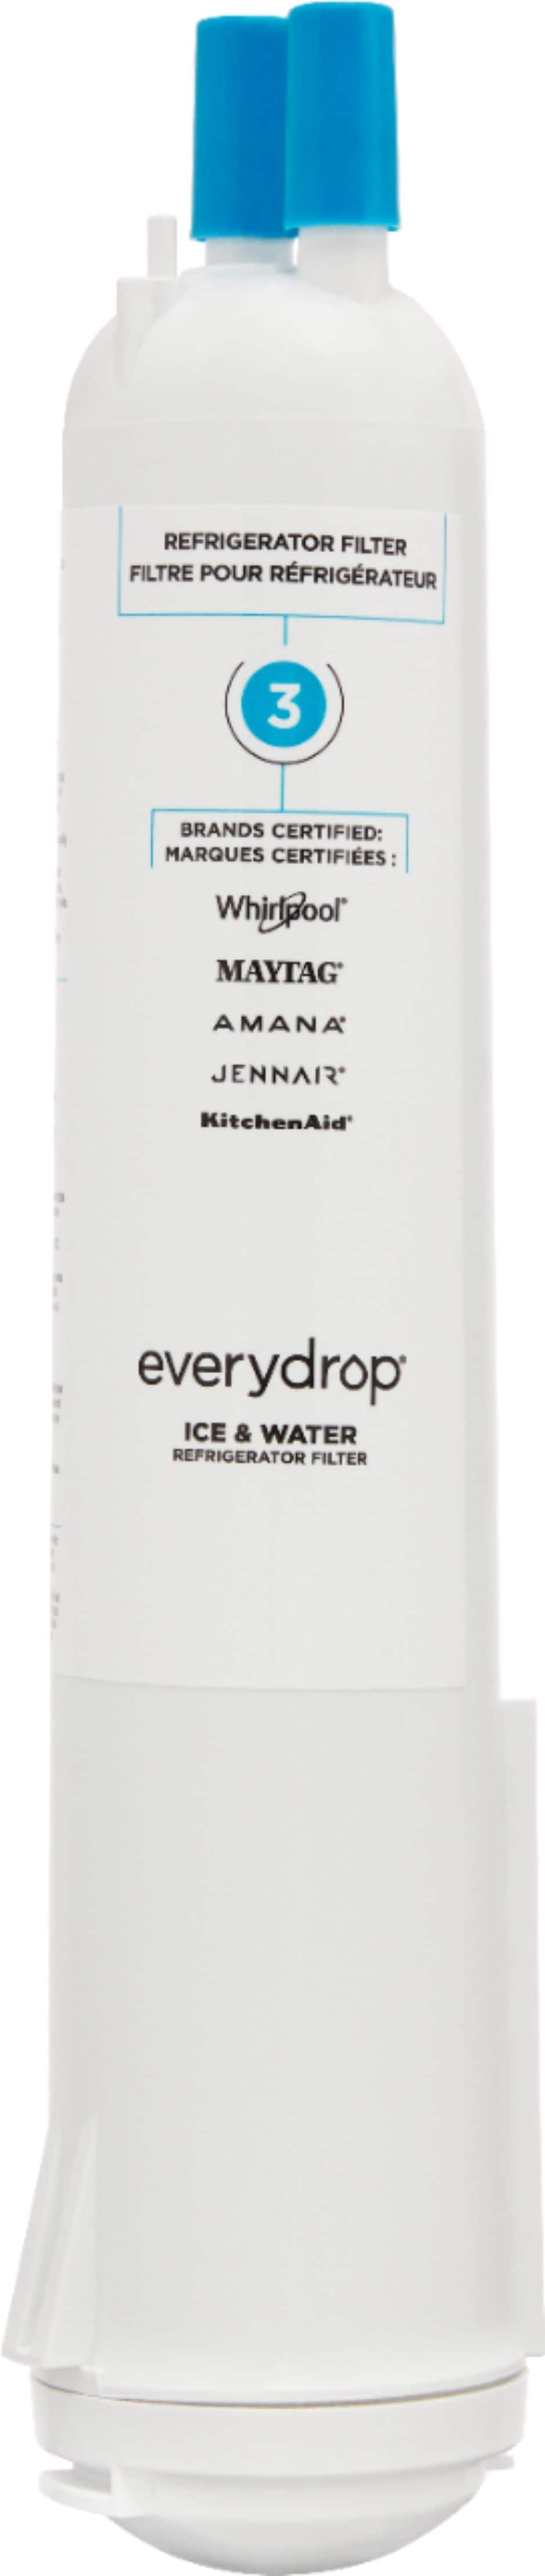 Whirlpool - everydrop 3 Ice and Water Filter - White_1